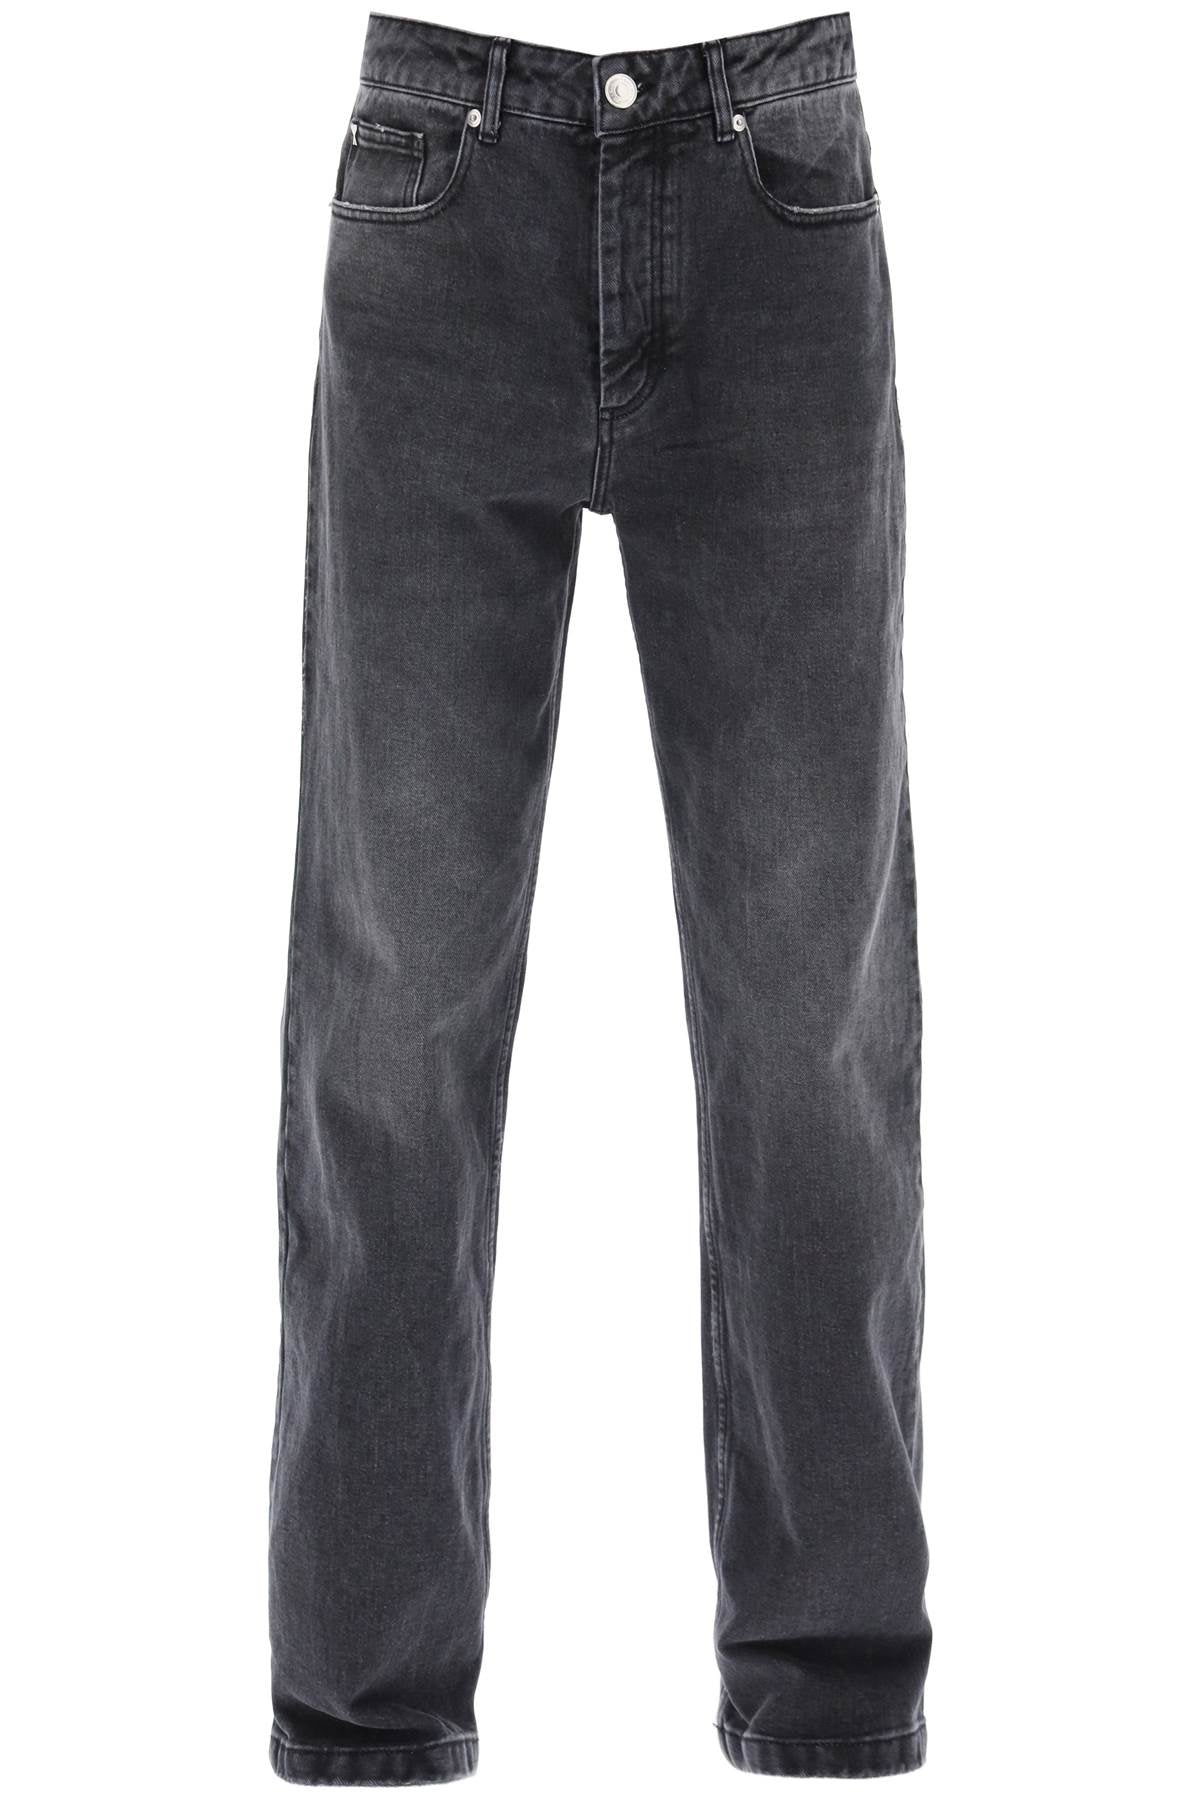 Ami Alexandre Matiussi Loose Jeans With Straight Cut Men